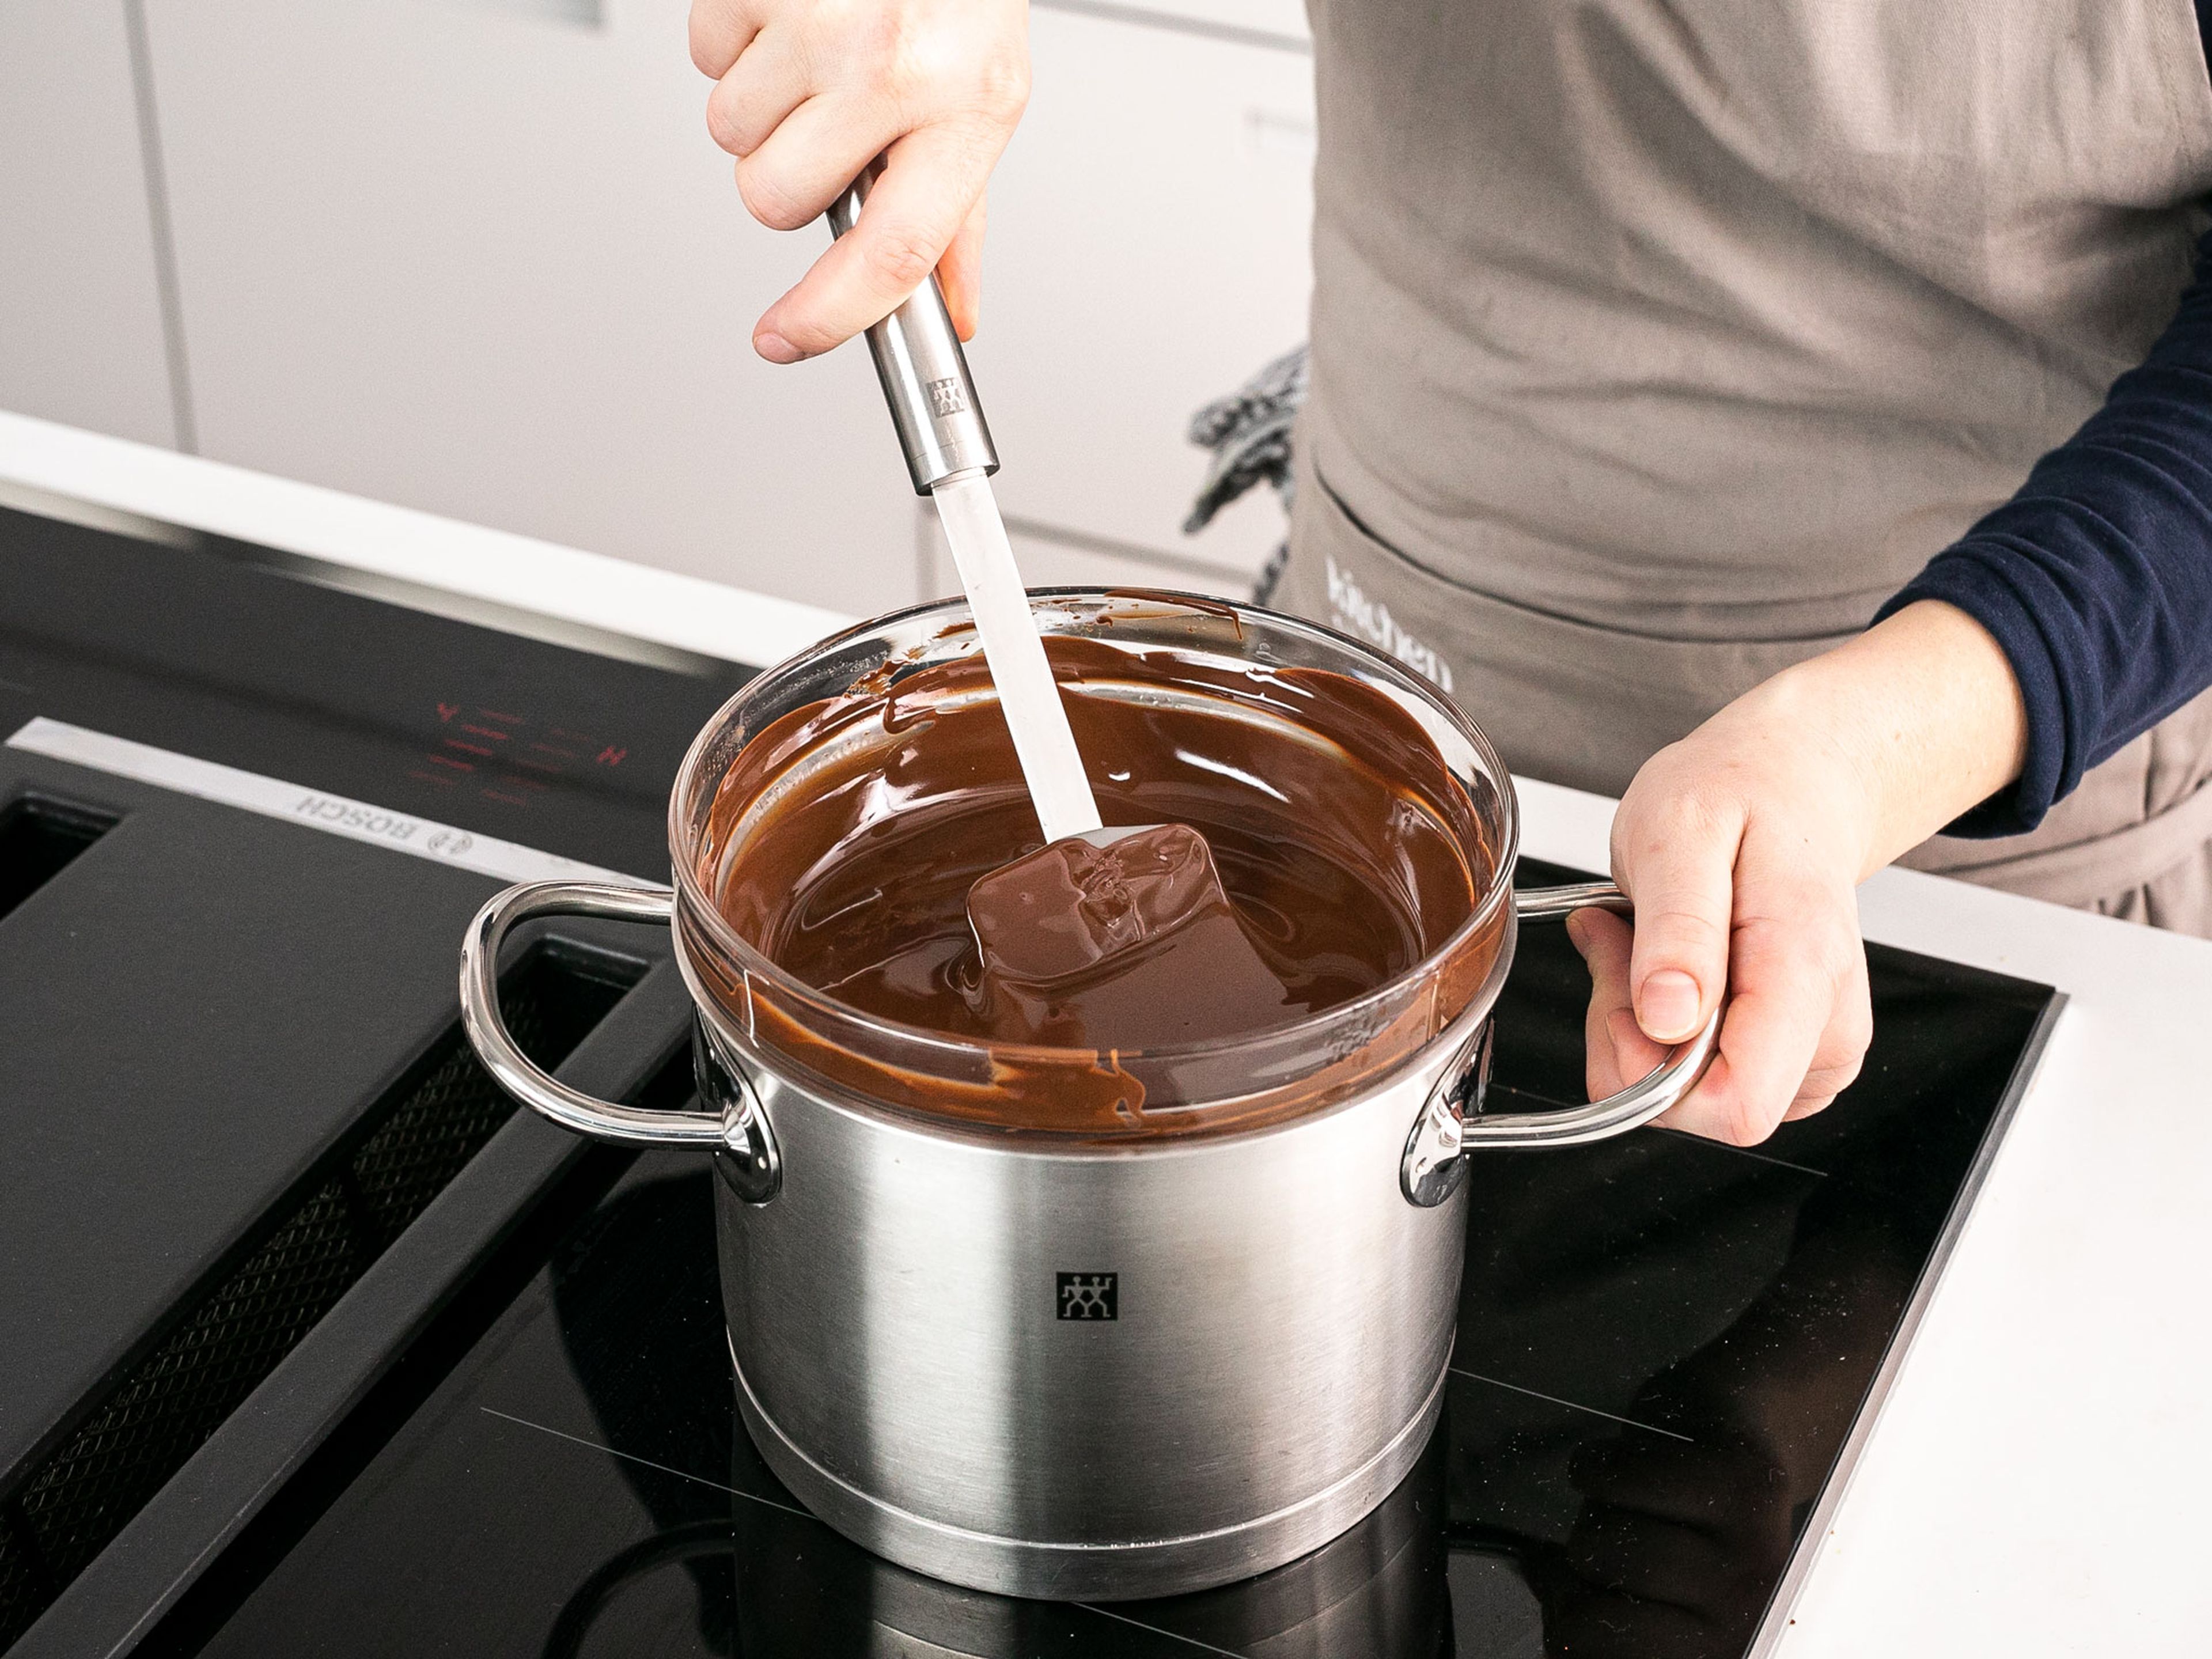 For the filling, melt chocolate in a heatproof bowl over a pot of simmering water. Once melted, remove from heat and mix in remaining butter, vanilla extract, cocoa powder, and powdered sugar until a homogeneous mixture forms. Let cool completely. For the glaze, heat remaining milk and sugar together until all the sugar dissolves, then set aside.